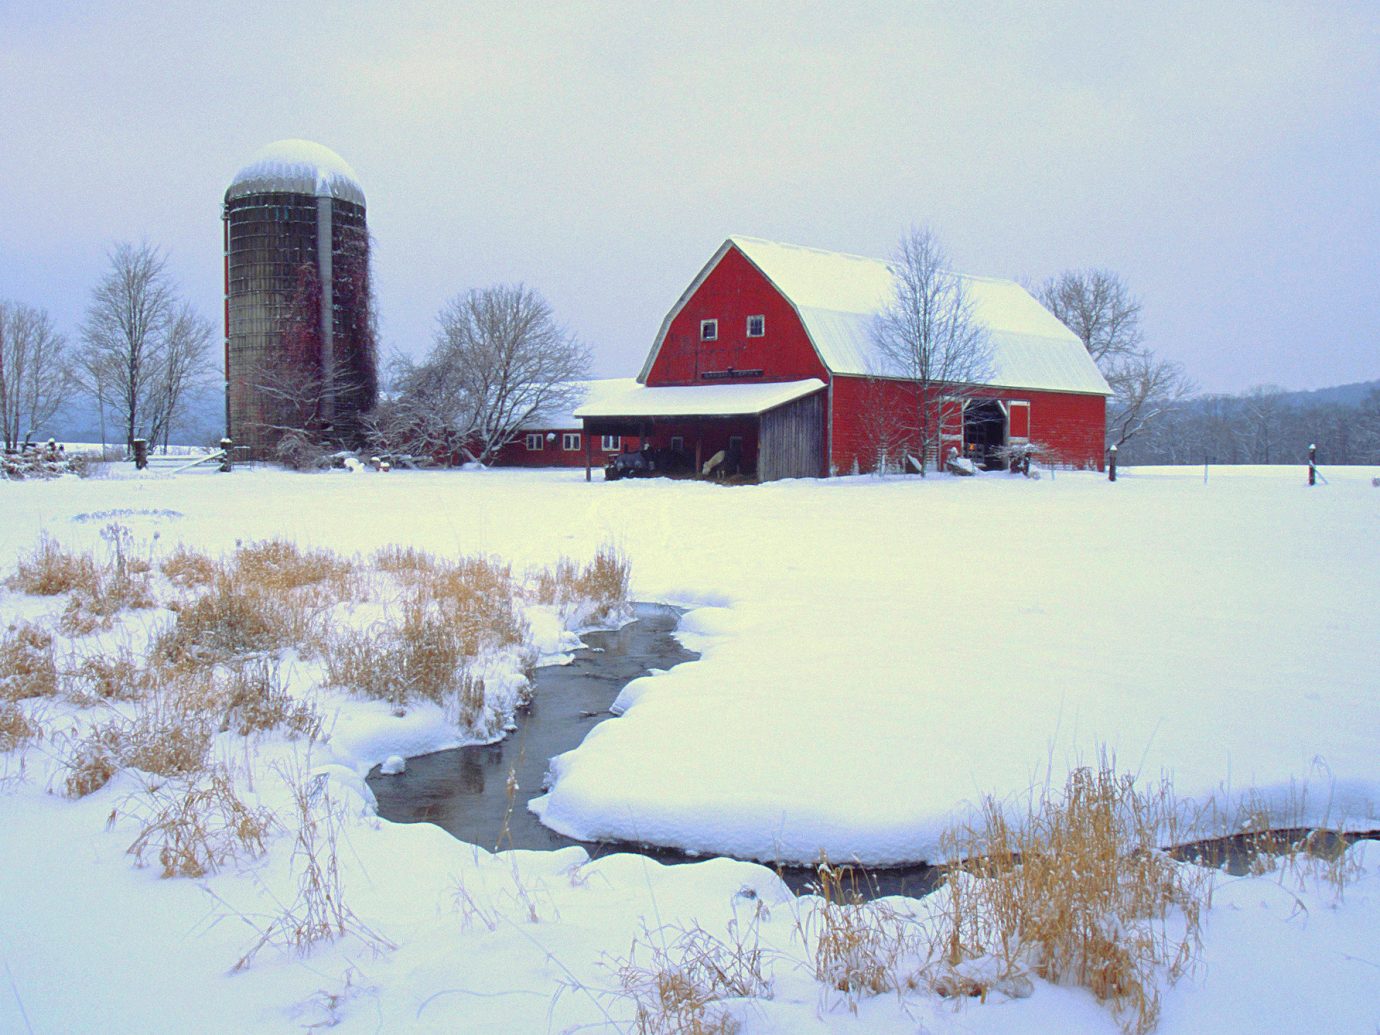 Weekend Getaways outdoor sky snow tree Winter water house freezing reflection daytime ice building barn